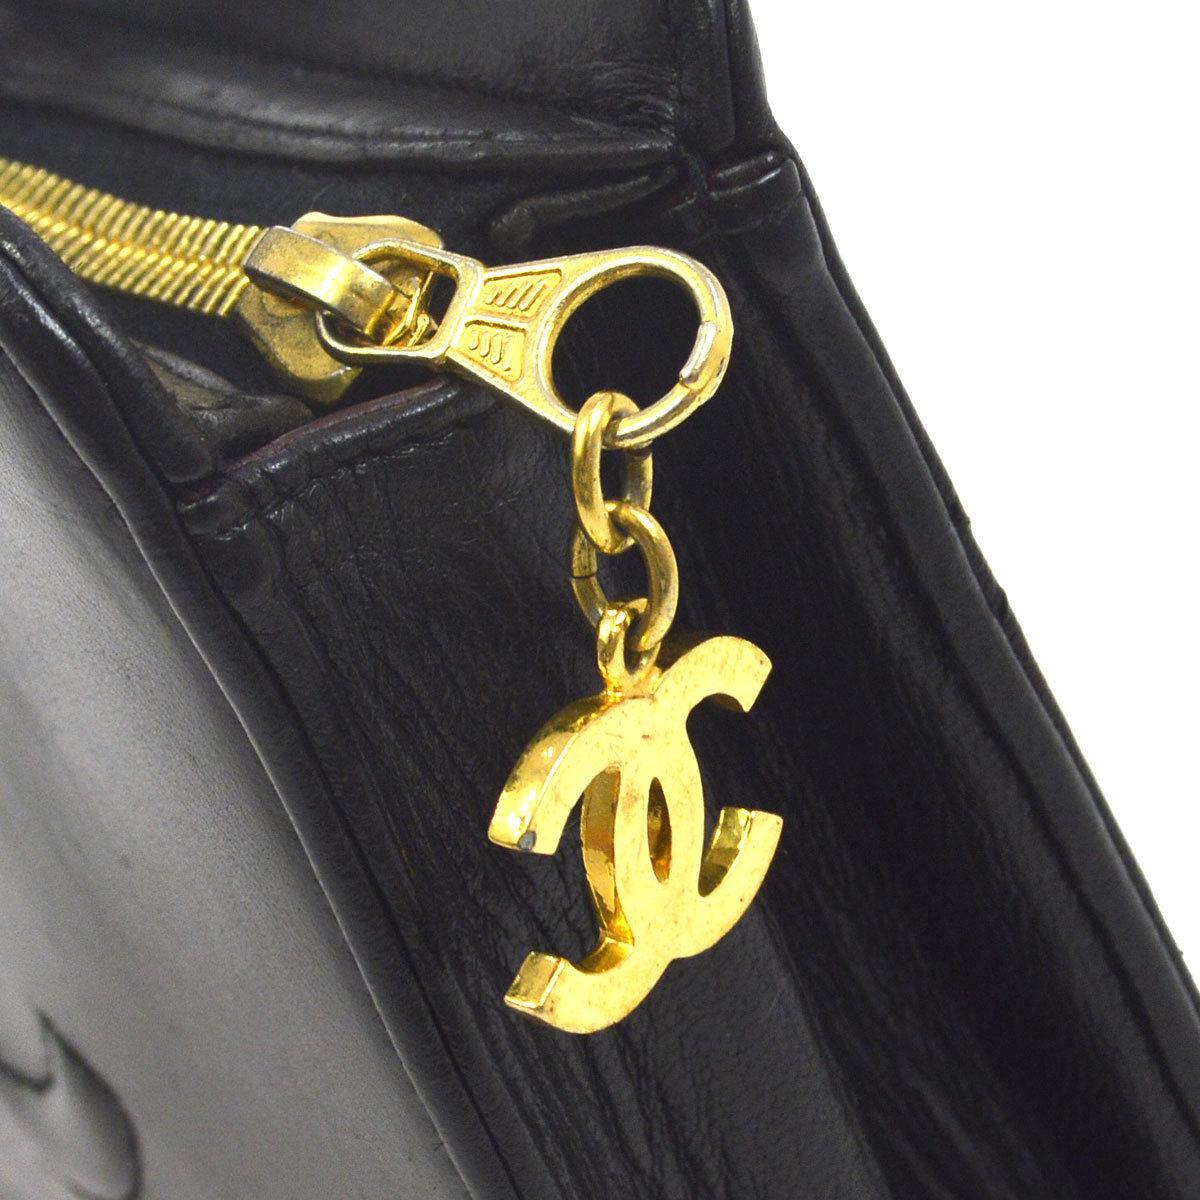 Chanel Black Leather Lambskin Gold Zipper Evening Wristlet Pouch Clutch Bag

Leather
Gold tone hardware
Leather lining
Zipper closure
Date code present
Made in France
Measures 8